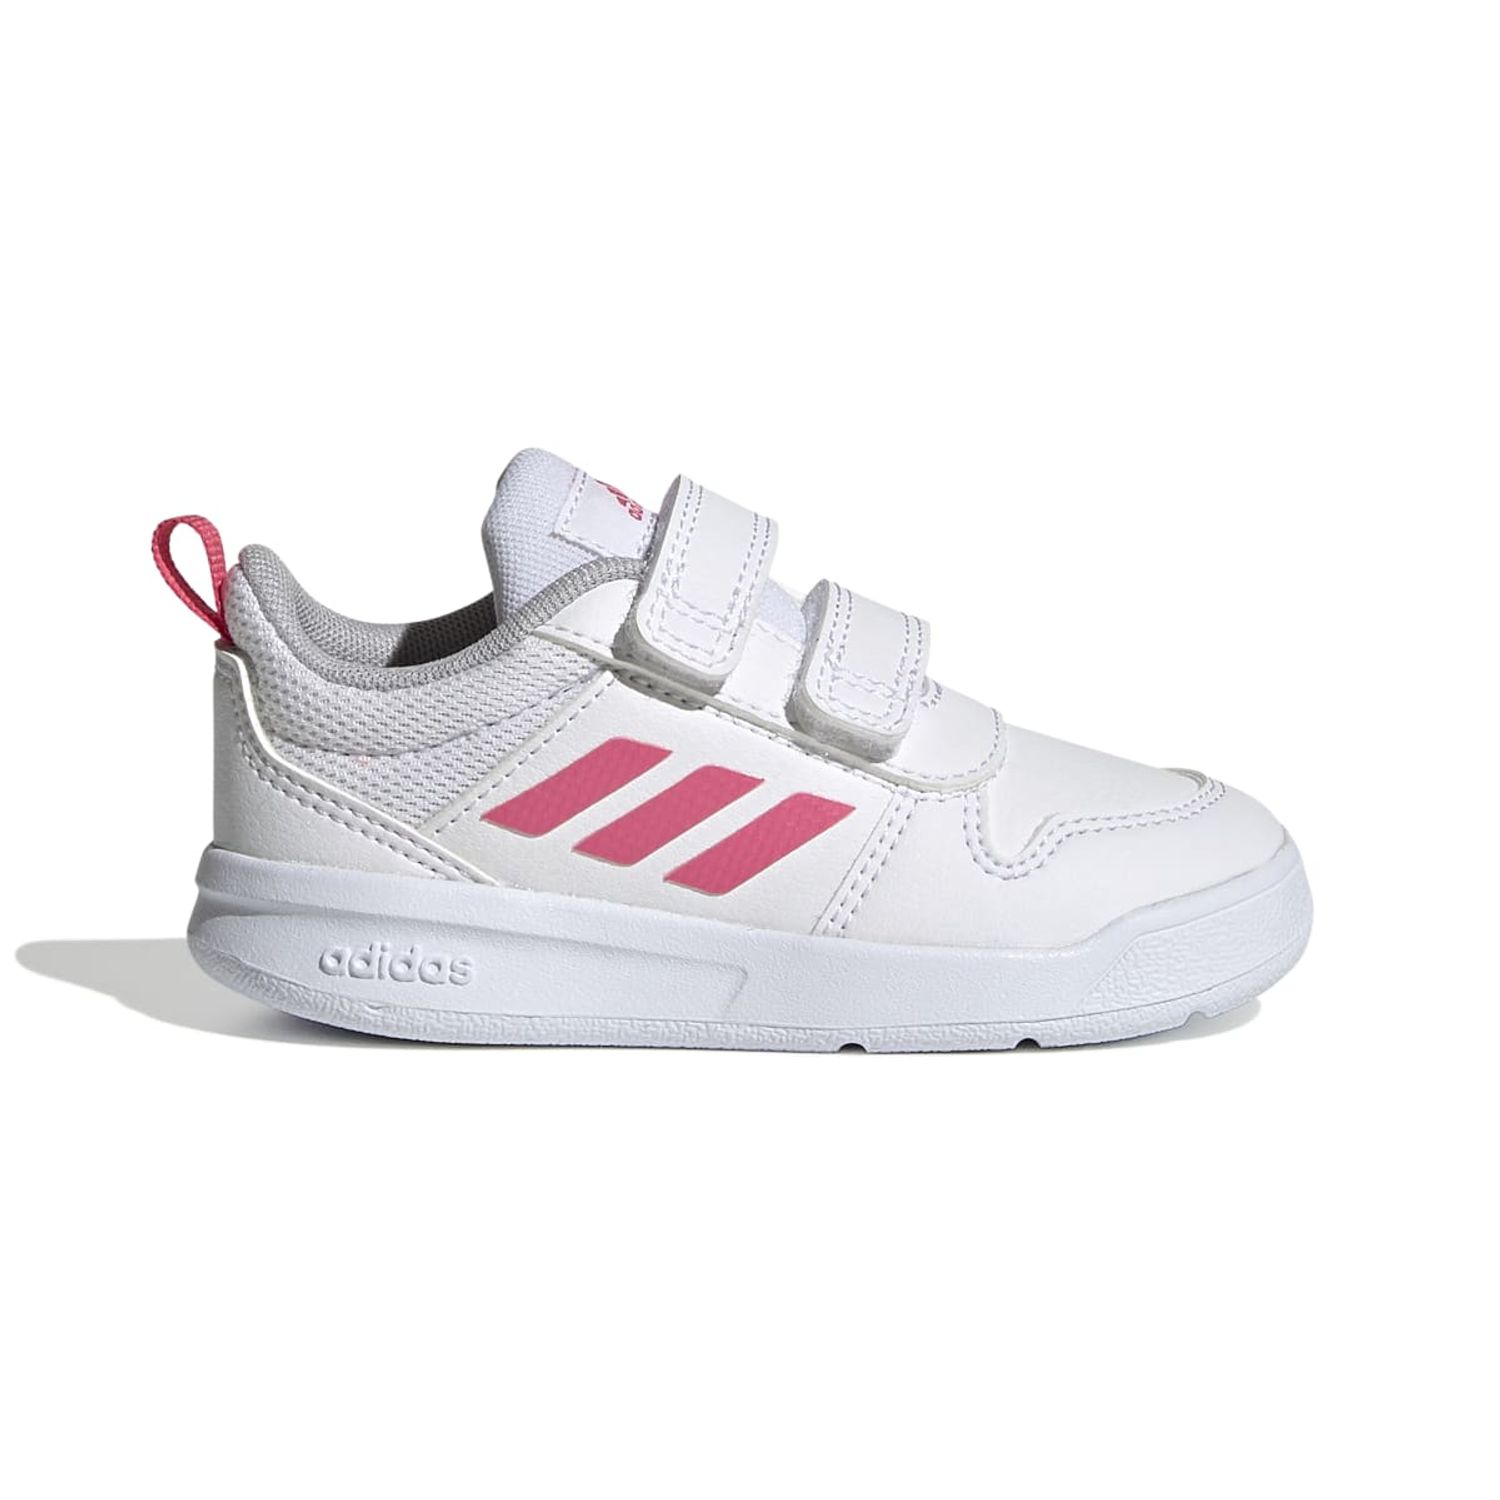 verkrachting Obsessie hun White pink adidas Infant Tensaur Trainers - Get The Label